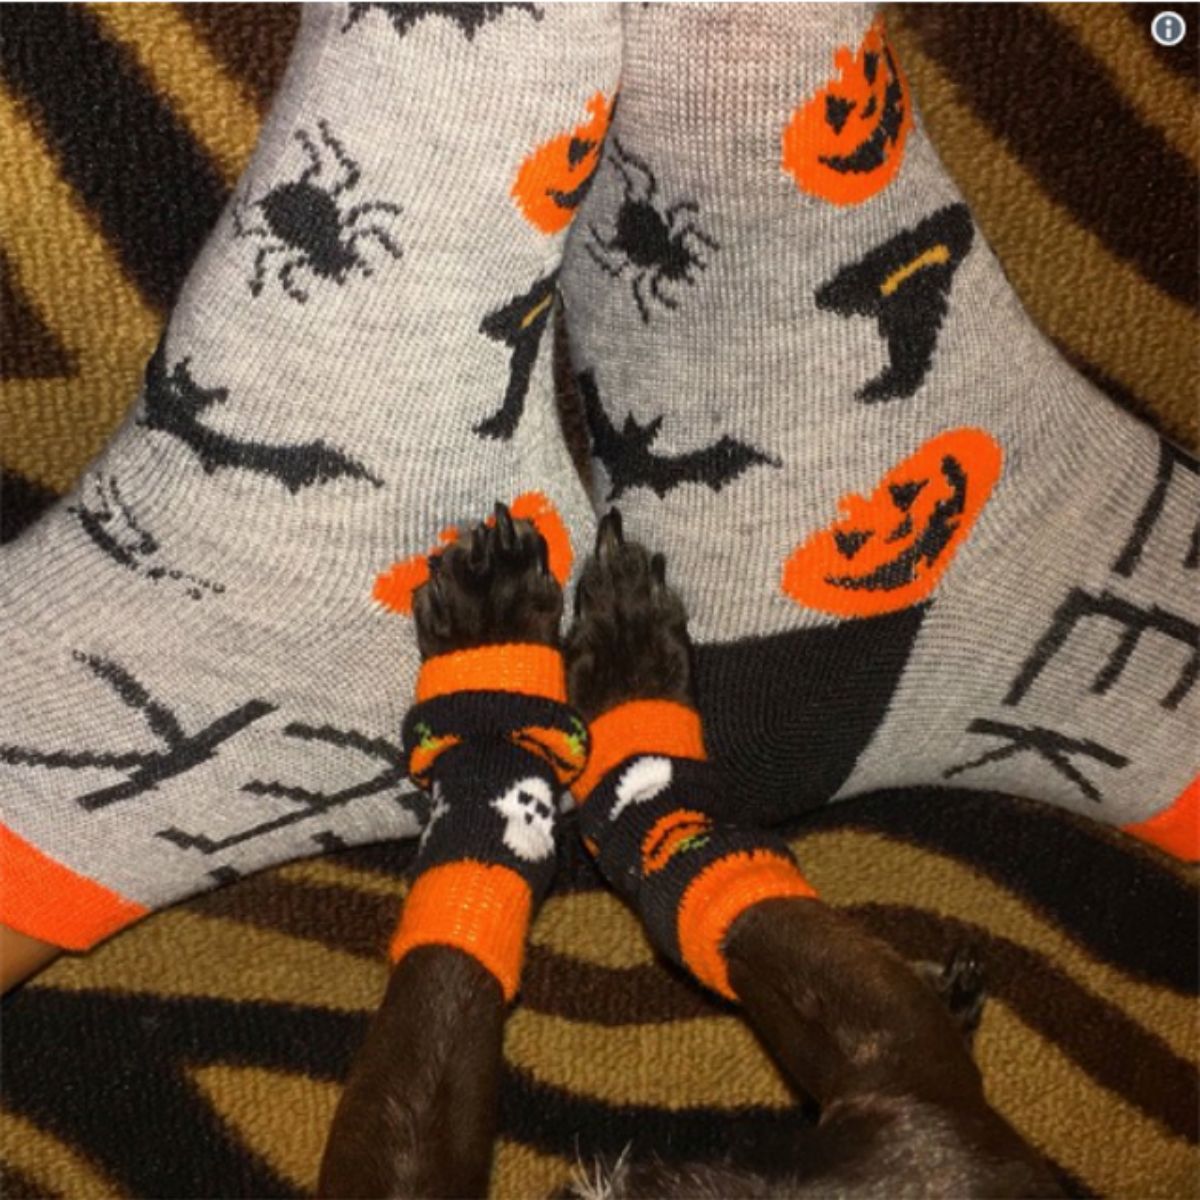 a woman's legs with a dog's legs with both wearing black, orange and grey matching halloween-themed socks